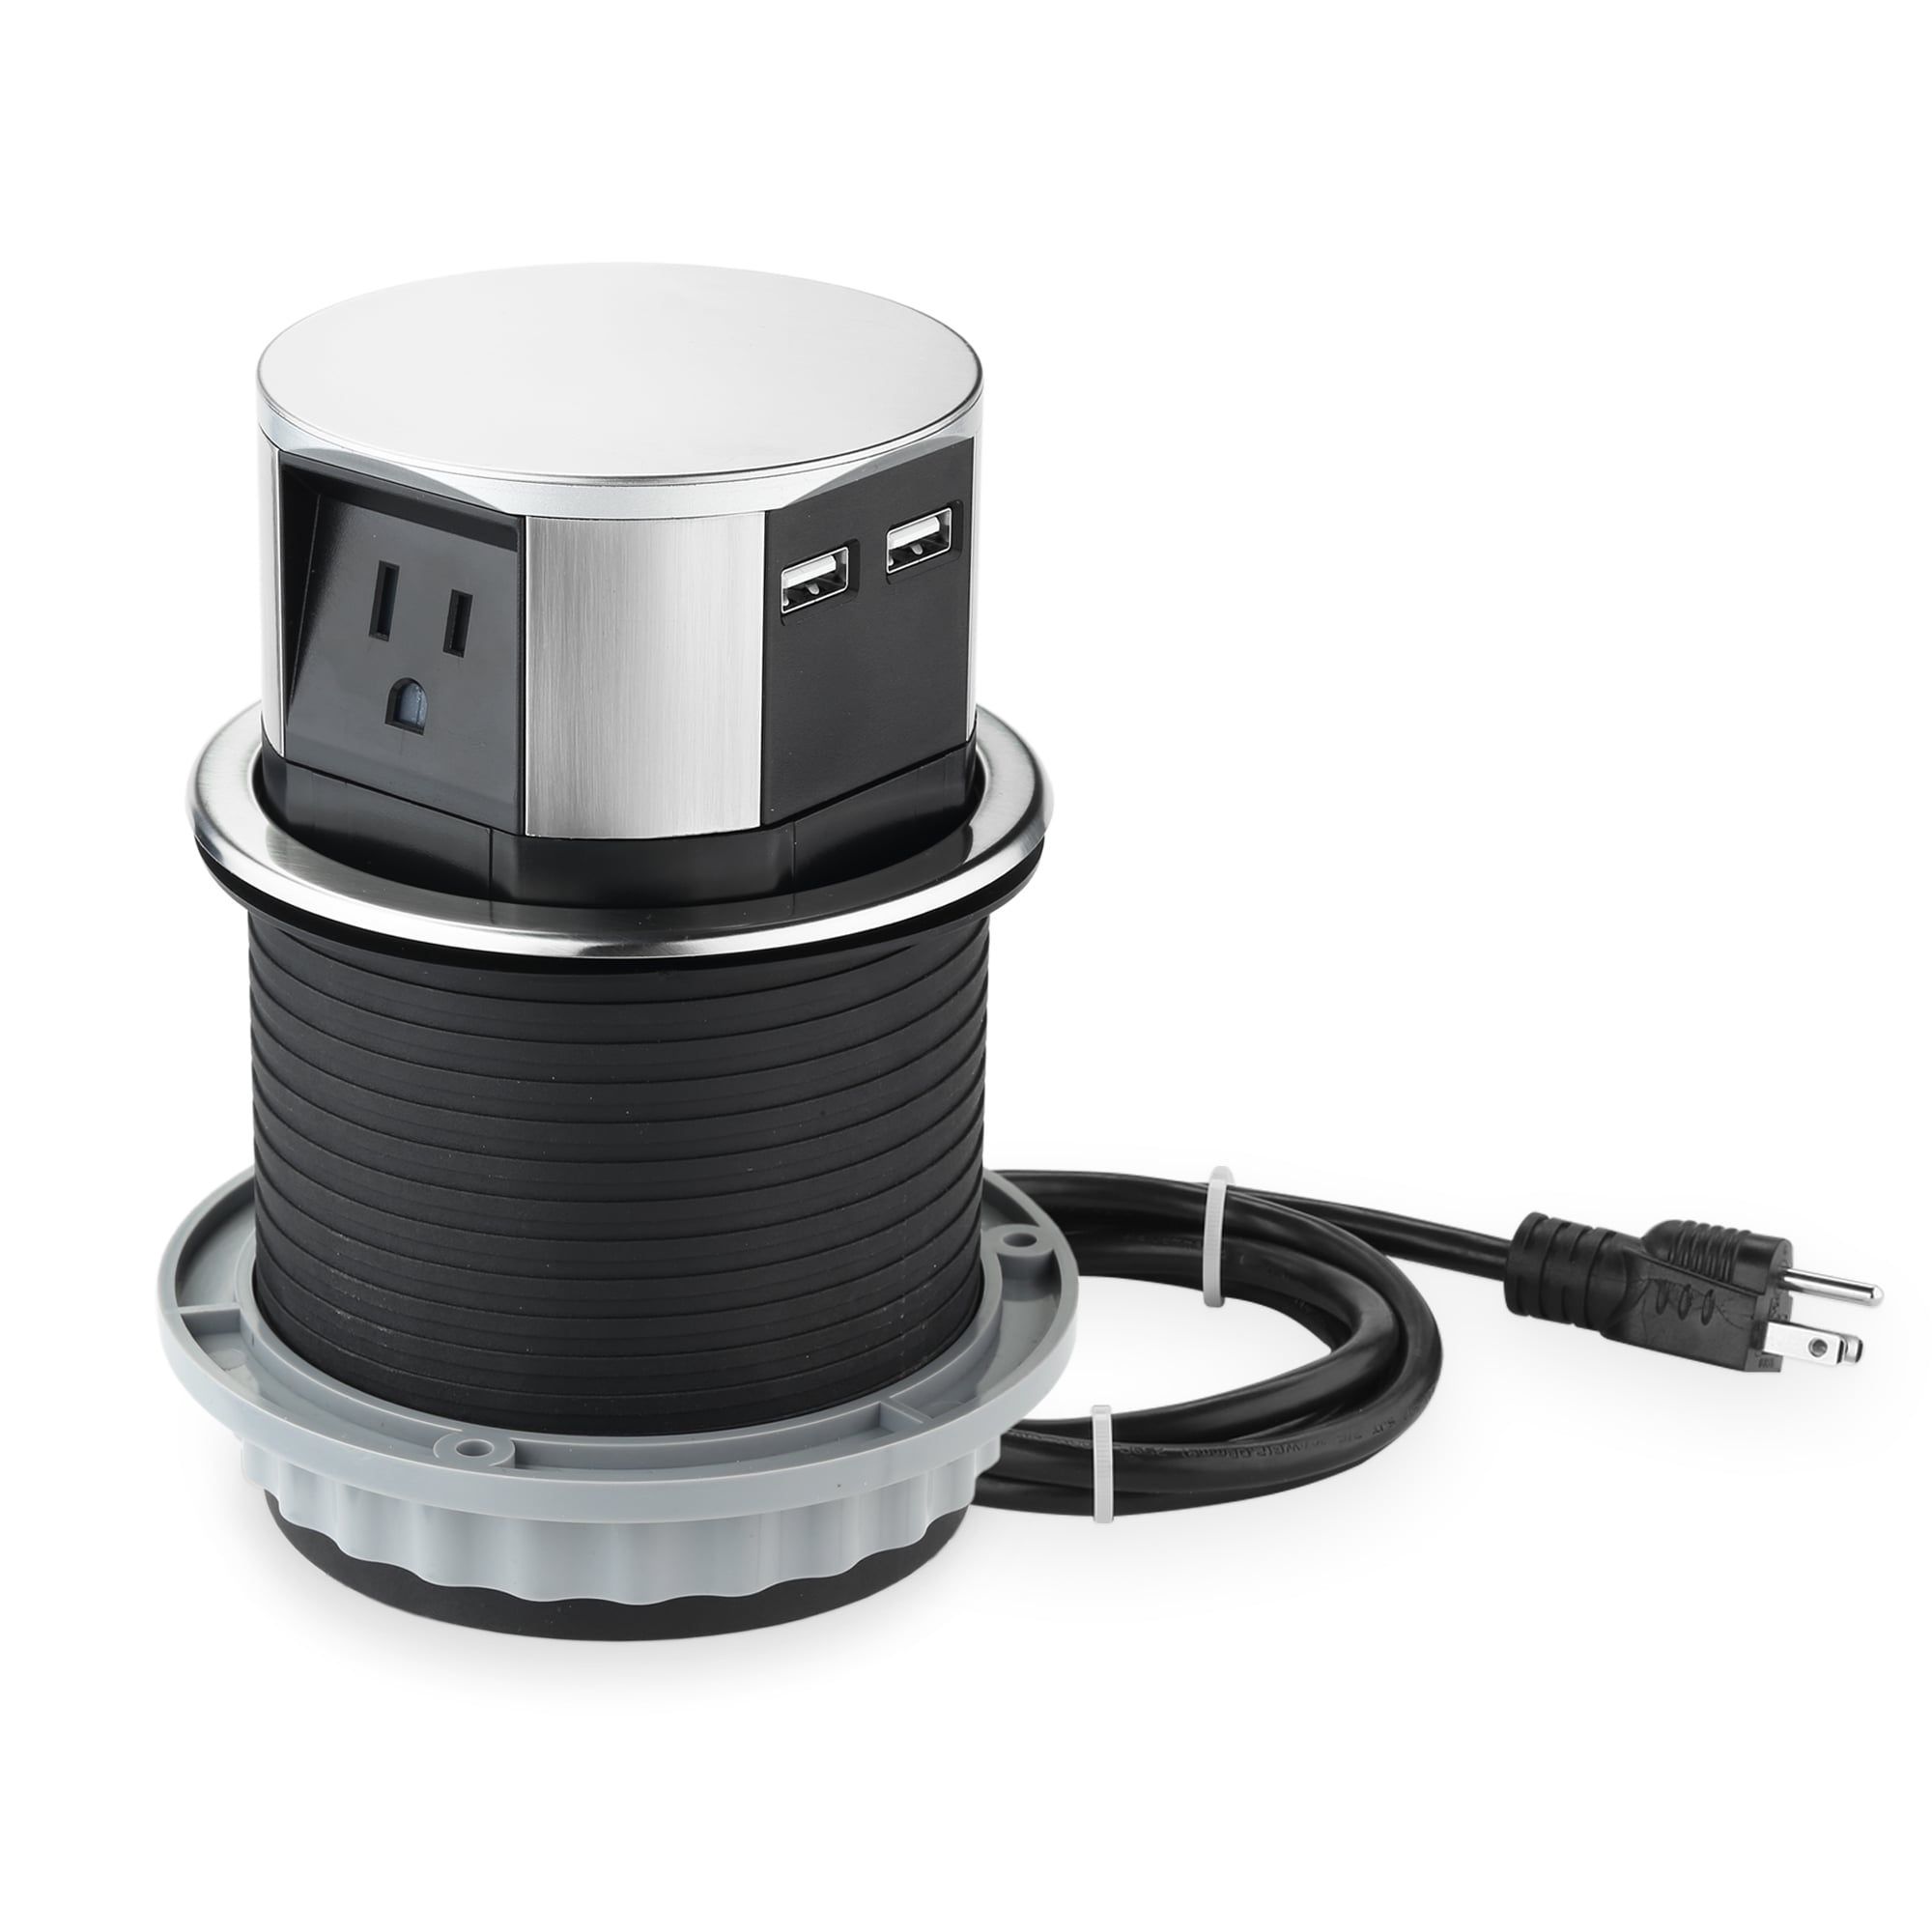  Link2Home 20 Ft. Power Handle Extension Cord W/ 2 Outlets & 2  USB Ports - Wall Bracket & Hardware Included : Everything Else